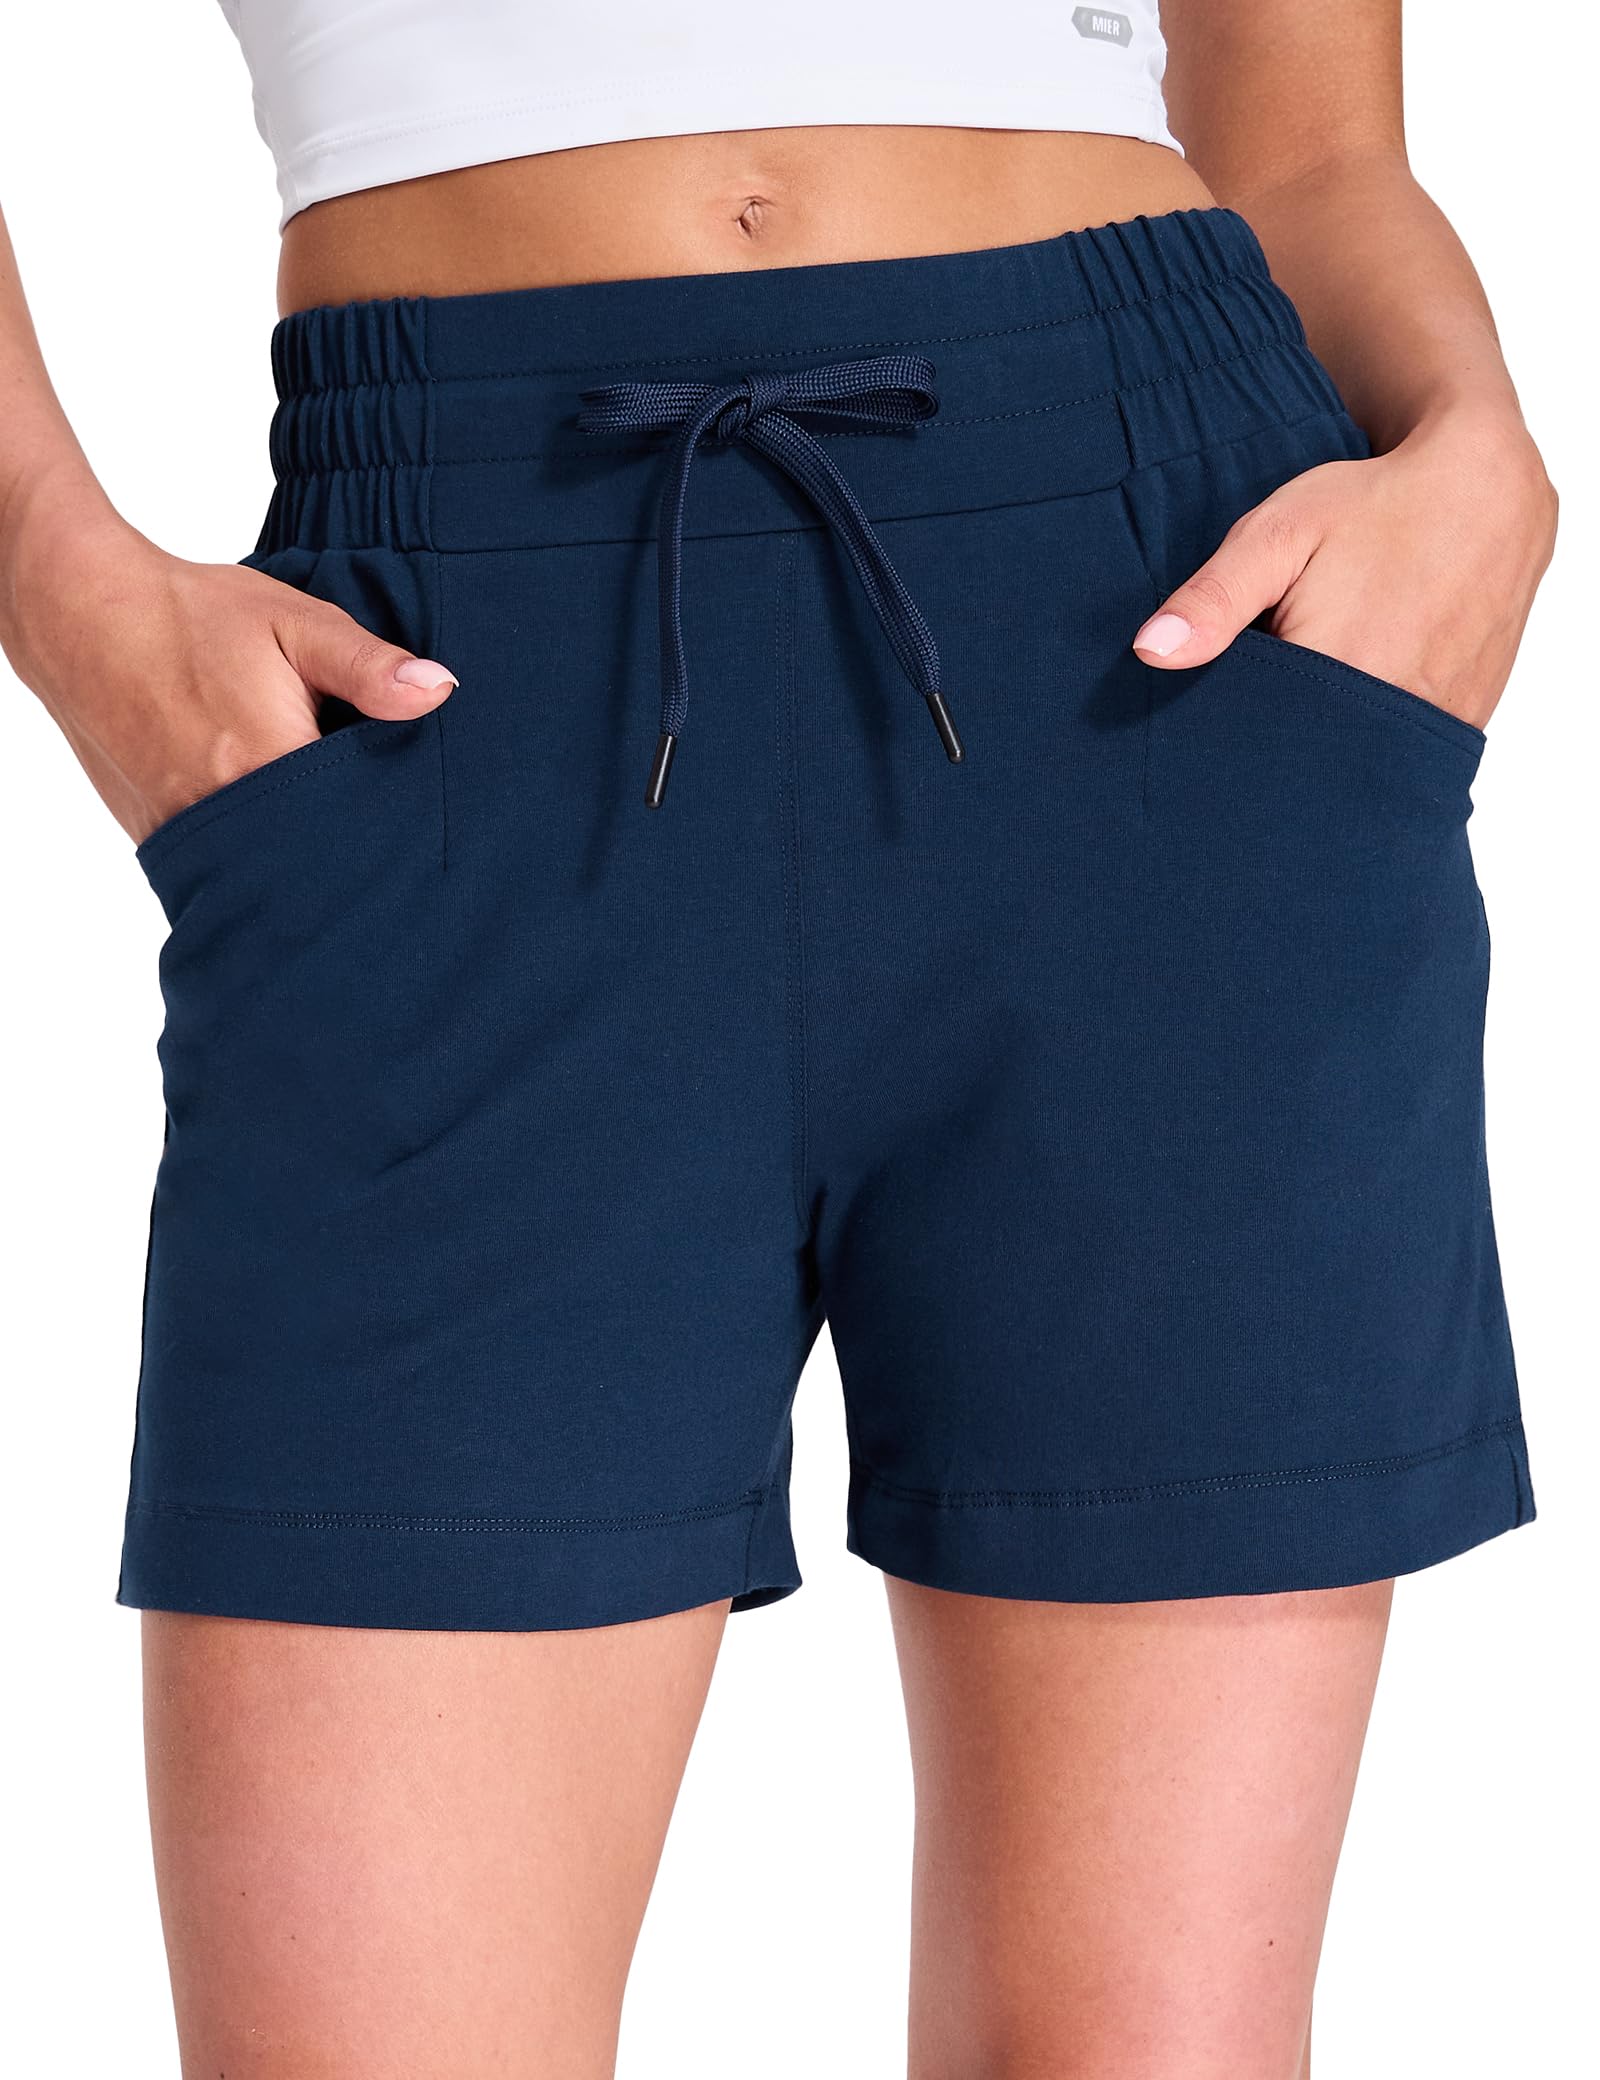 Women's Athletic Running Cotton Shorts 4" High Waisted